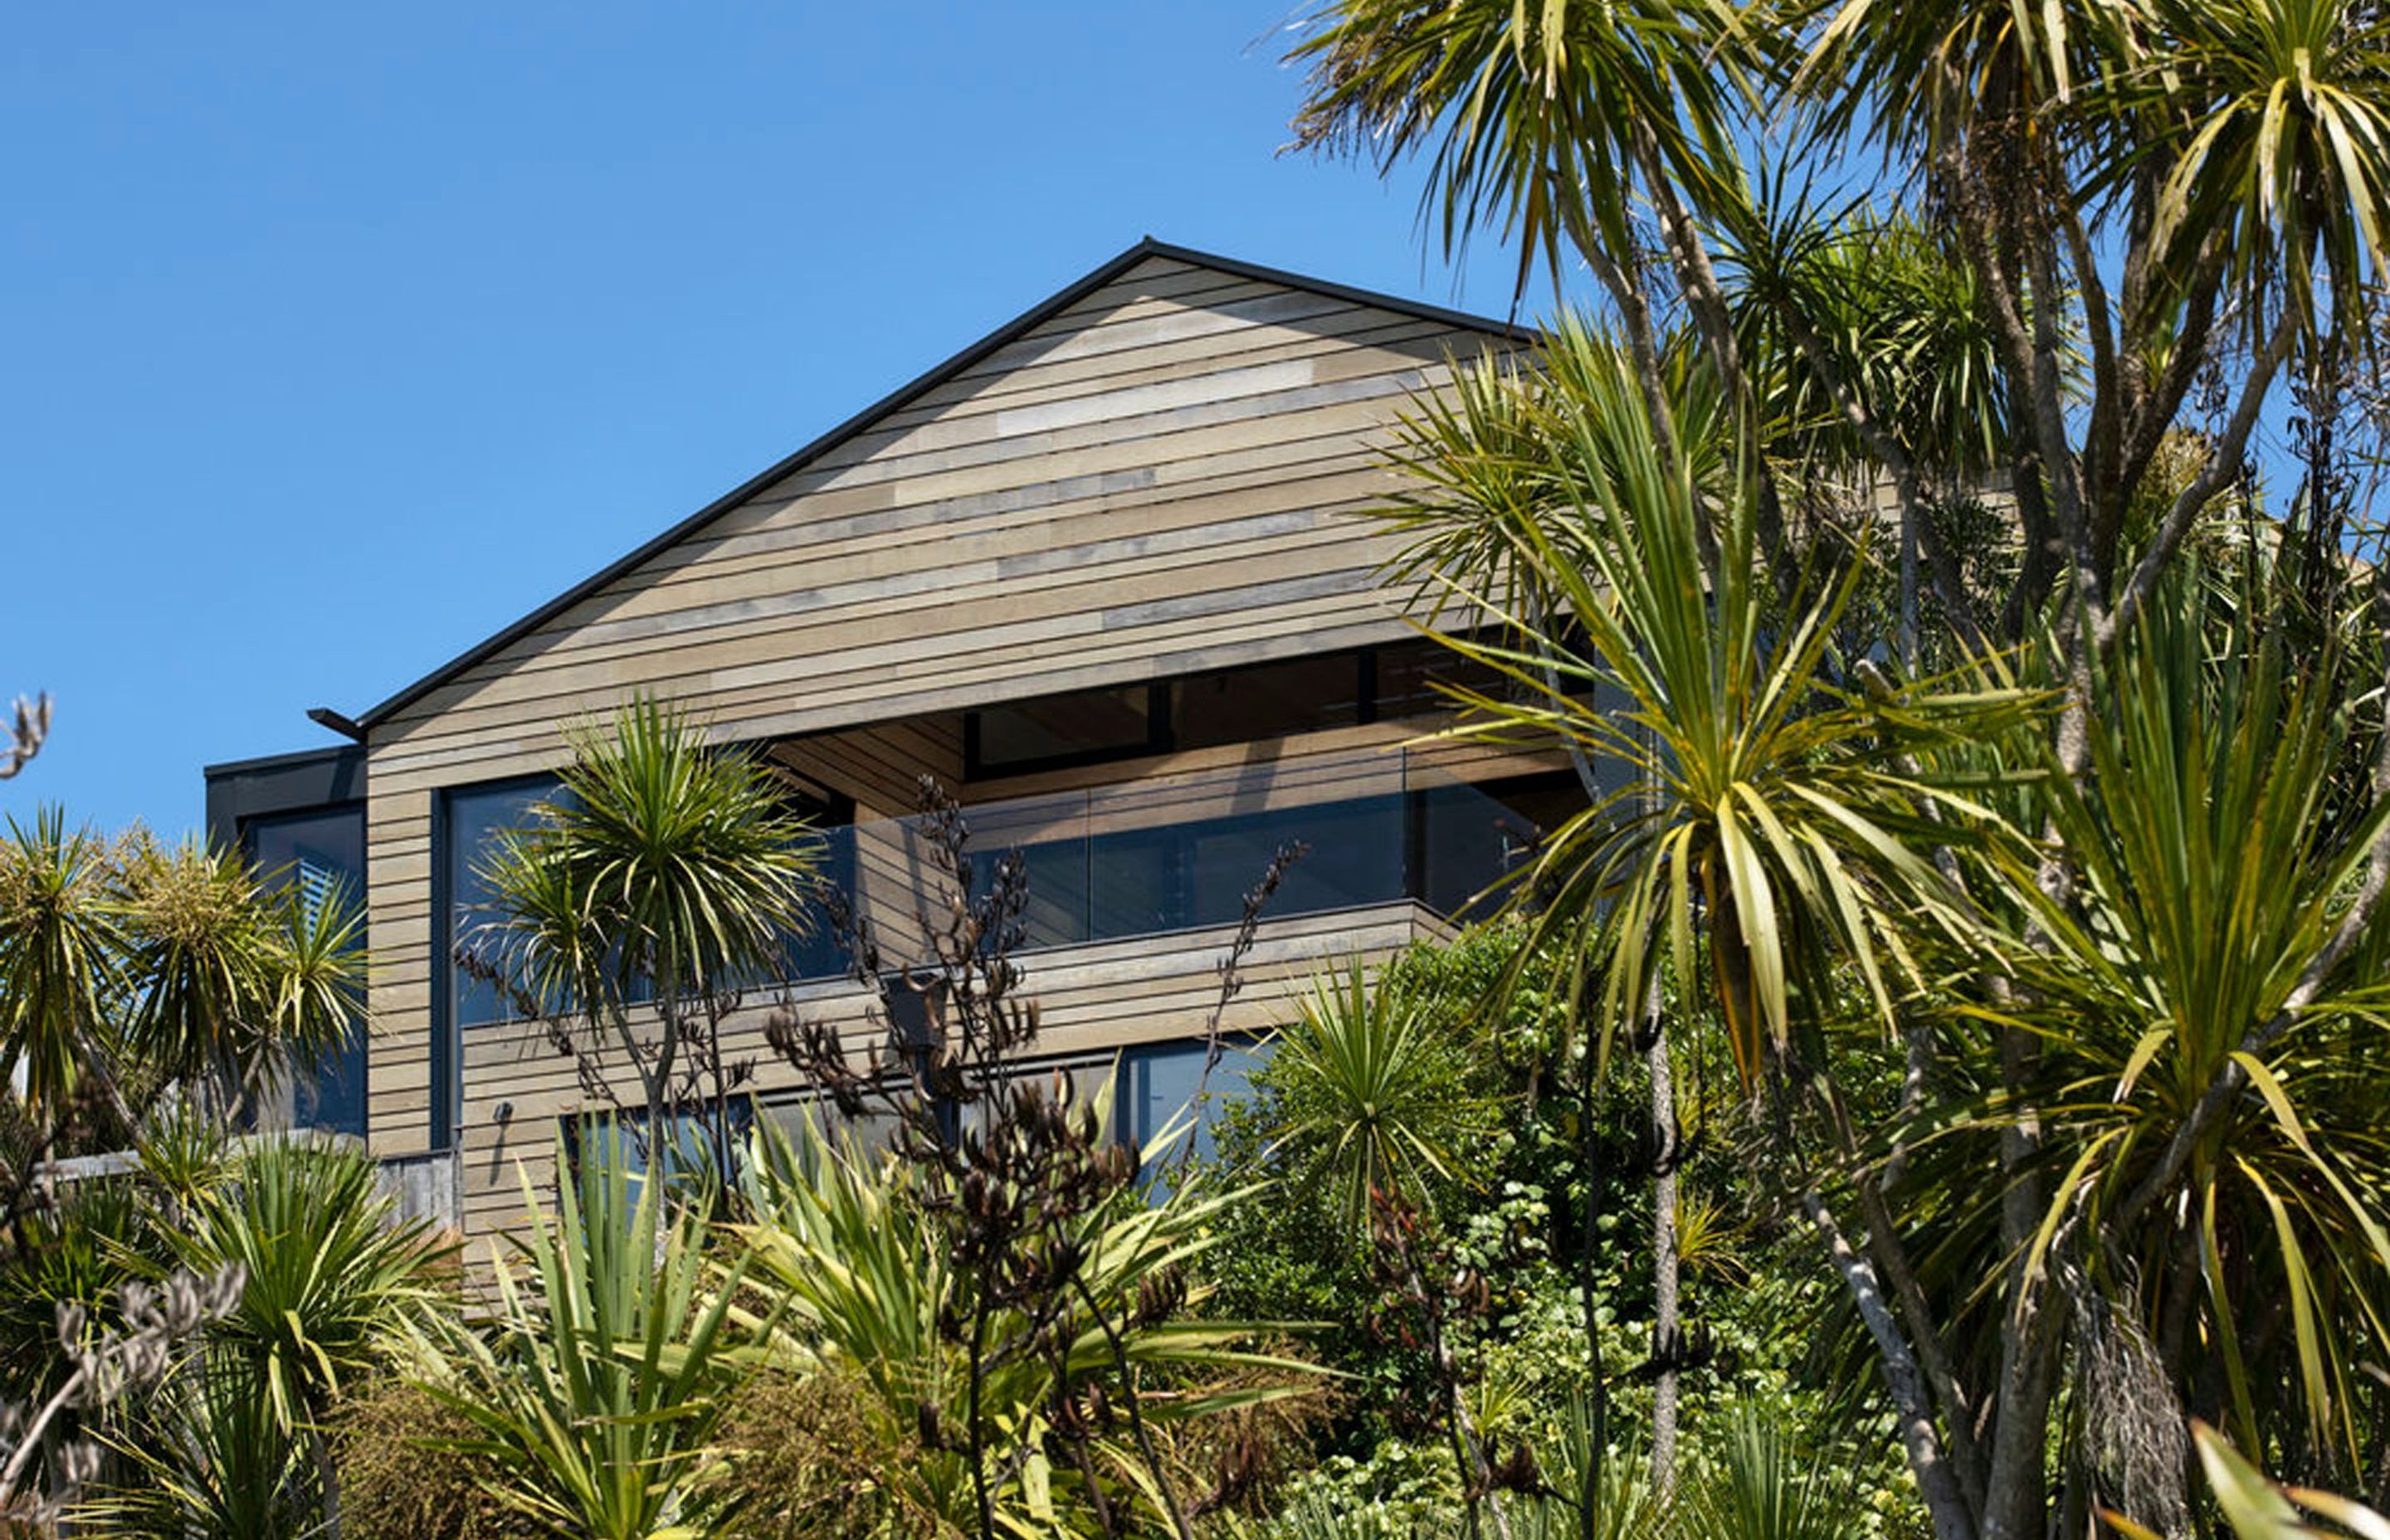 Horizontal cedar and glass define this elevation, complementing the greenery and light palette of the coastal area.